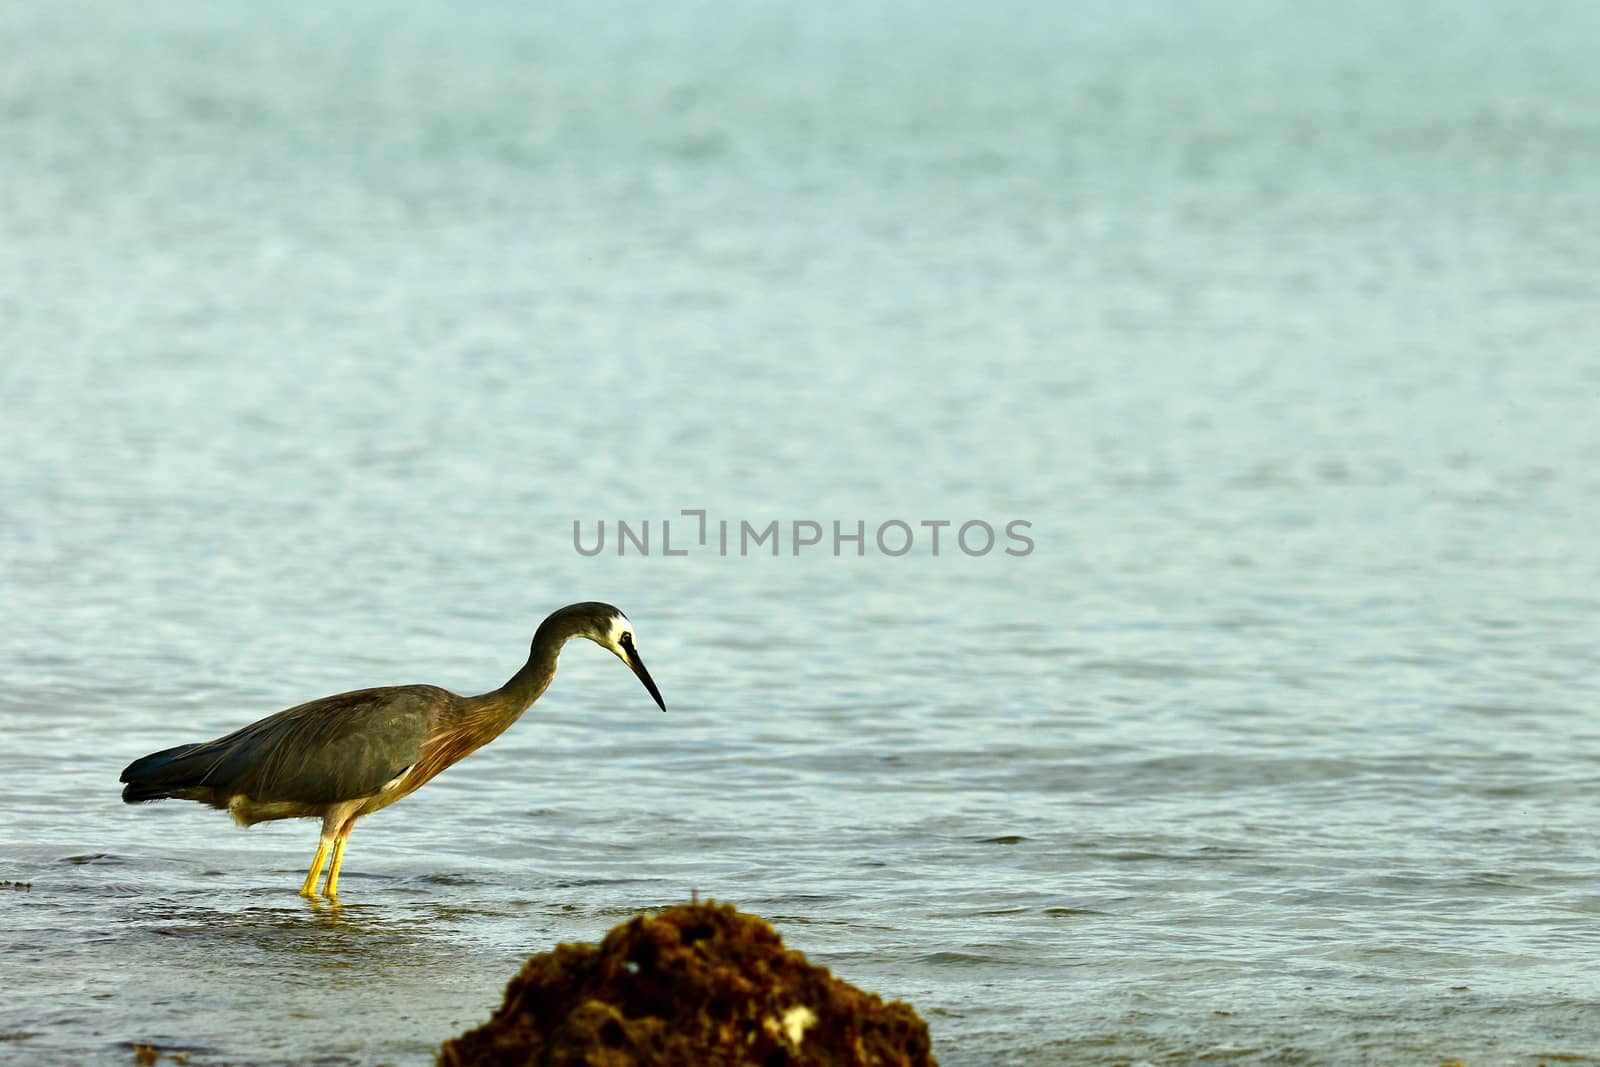 White-faced heron, or white-fronted heron (Egretta novaehollandiae) in a field. Adult in breeding plumage. by Marshalkina